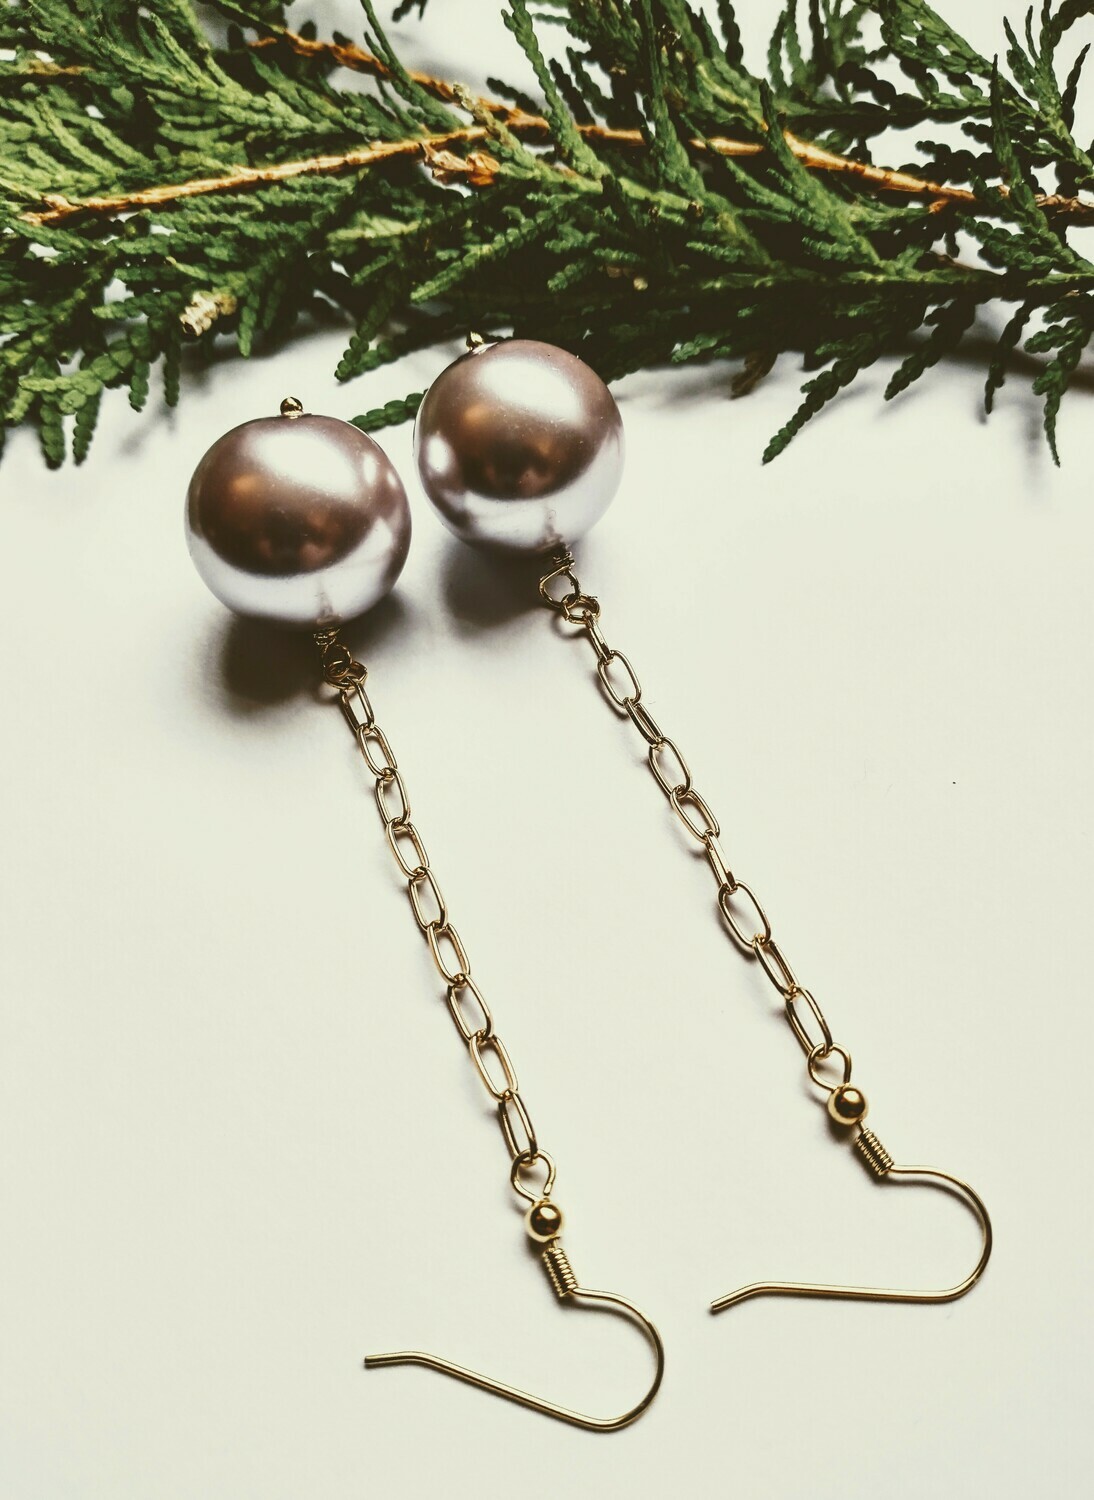 Was $23 - Now $12 (Vintage Japanese Pink Champagne Glass Tinsel Balls)